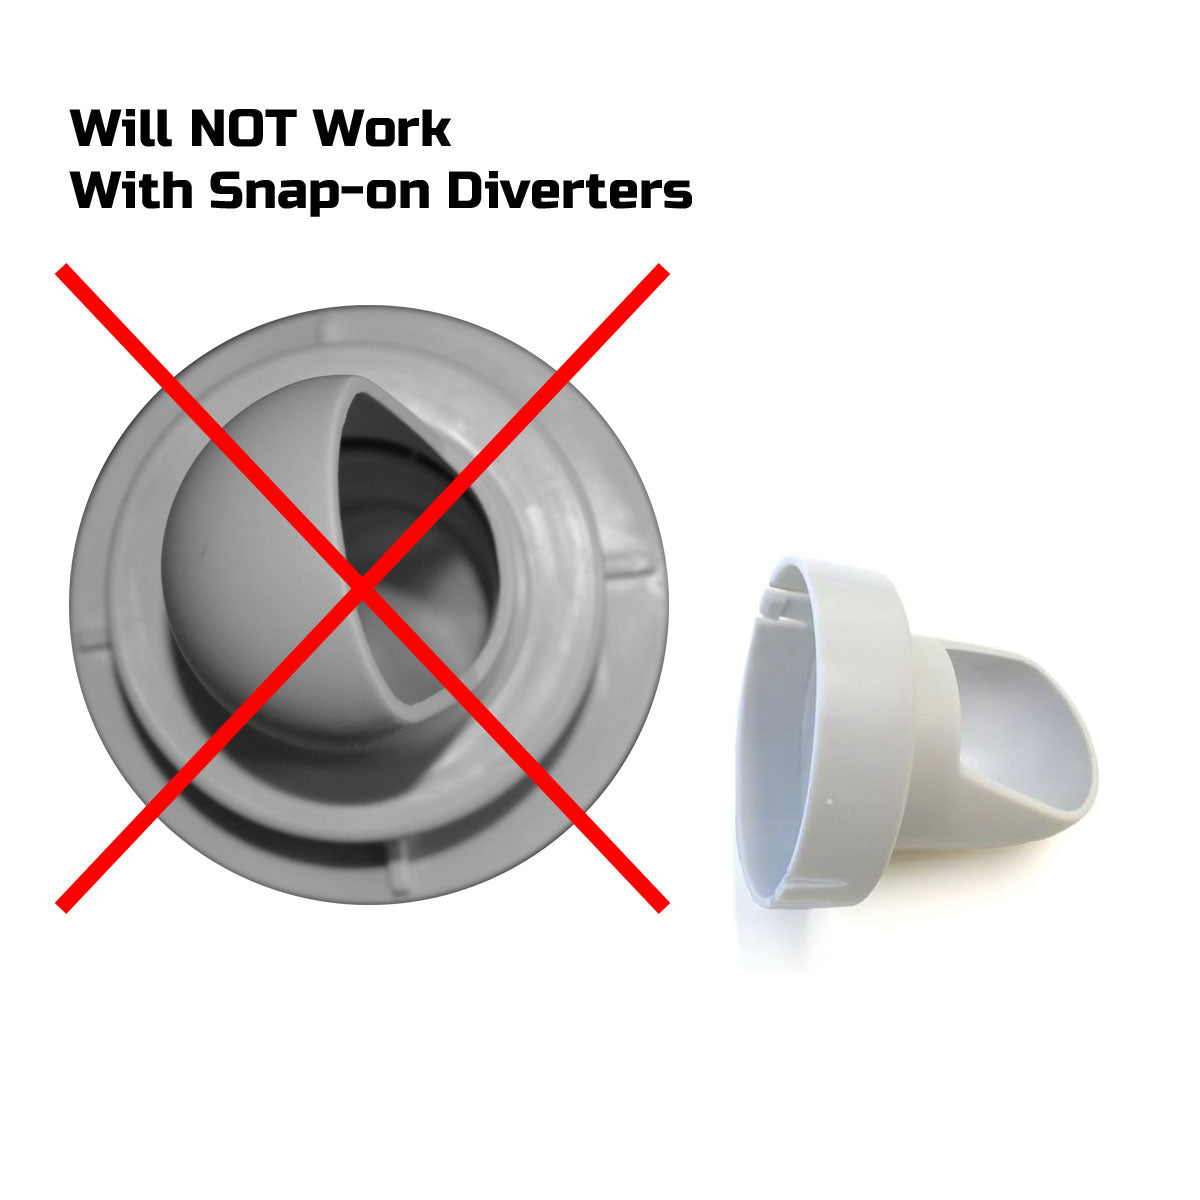 Incompatible Poly Group Diverter. Snap on.